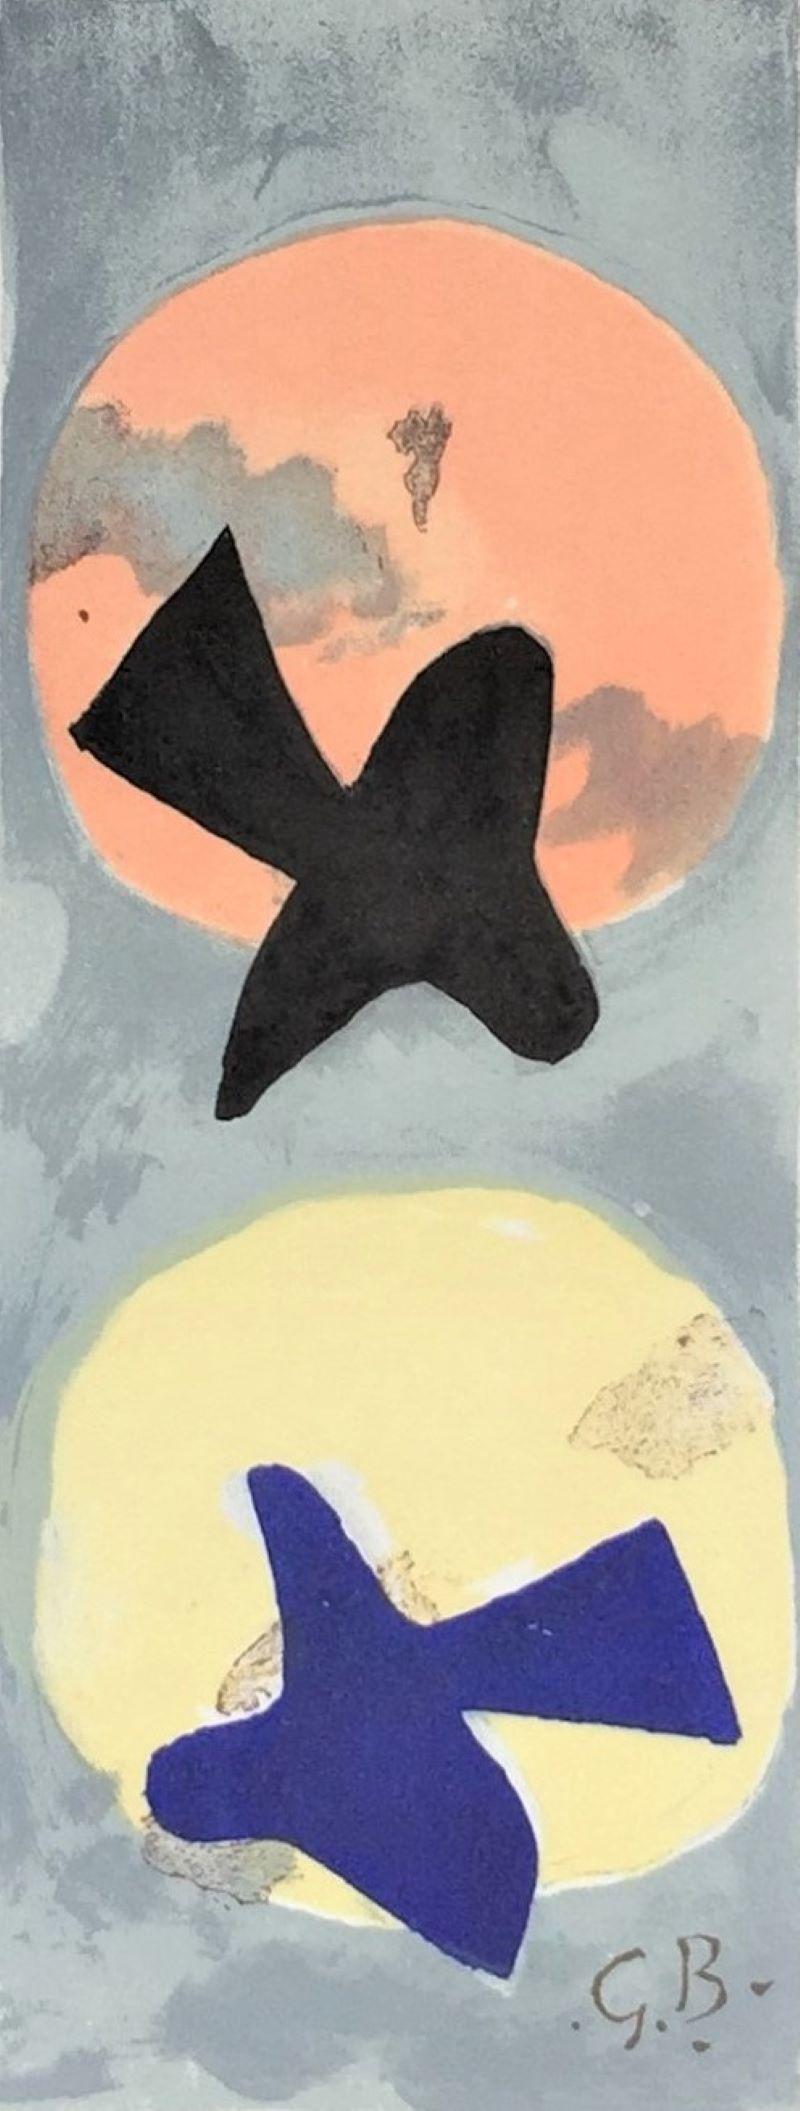 Soleil et lune II (Sun and Moon II) - Cubist Print by (after) Georges Braque